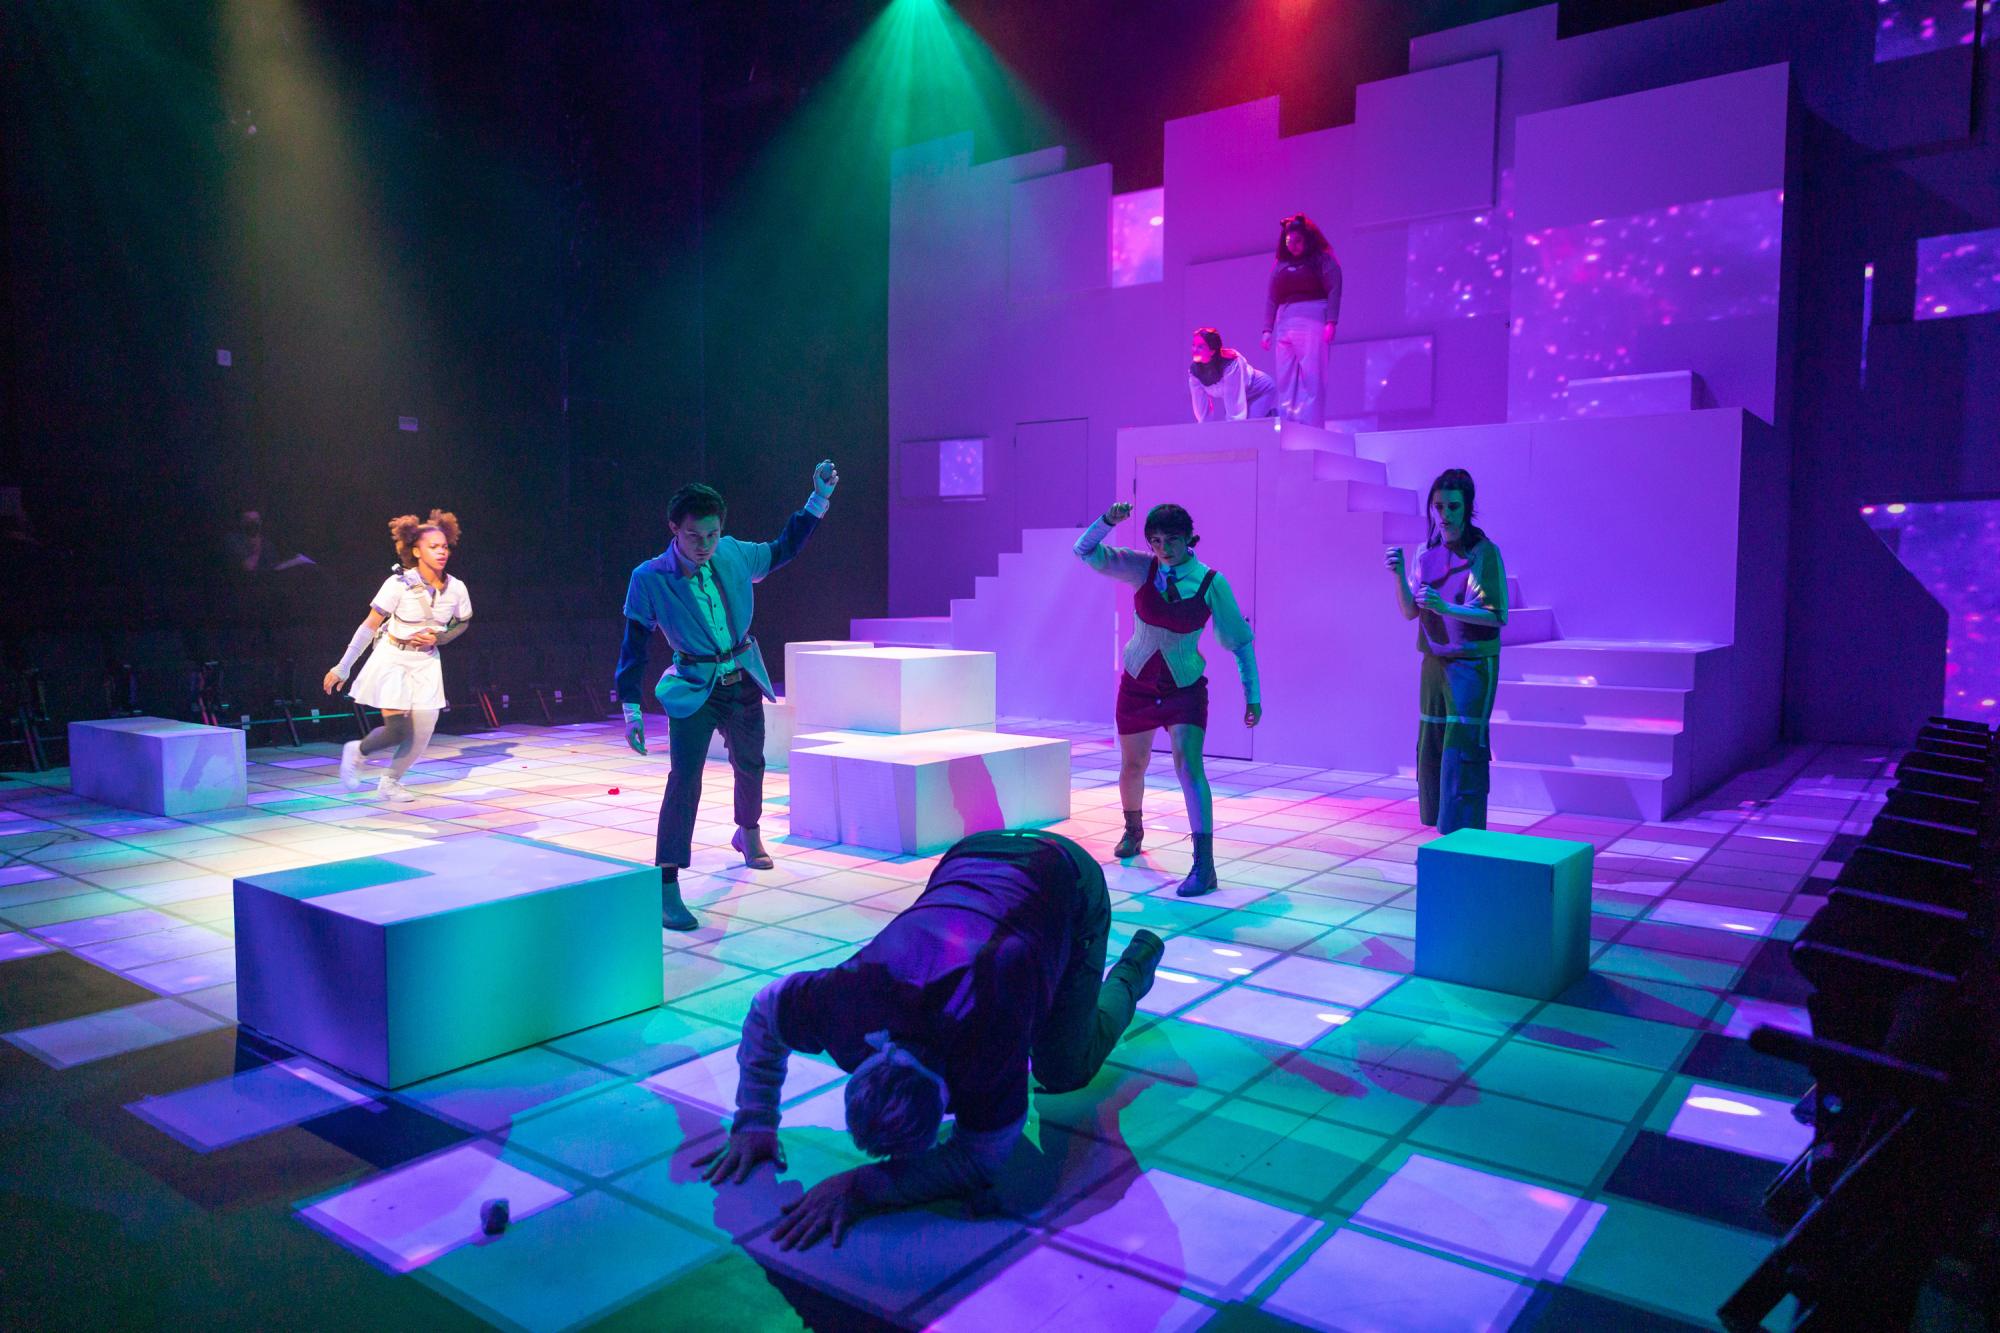 three actors throw things at a fourth actor who's on the ground, with colorful stage lighting around them